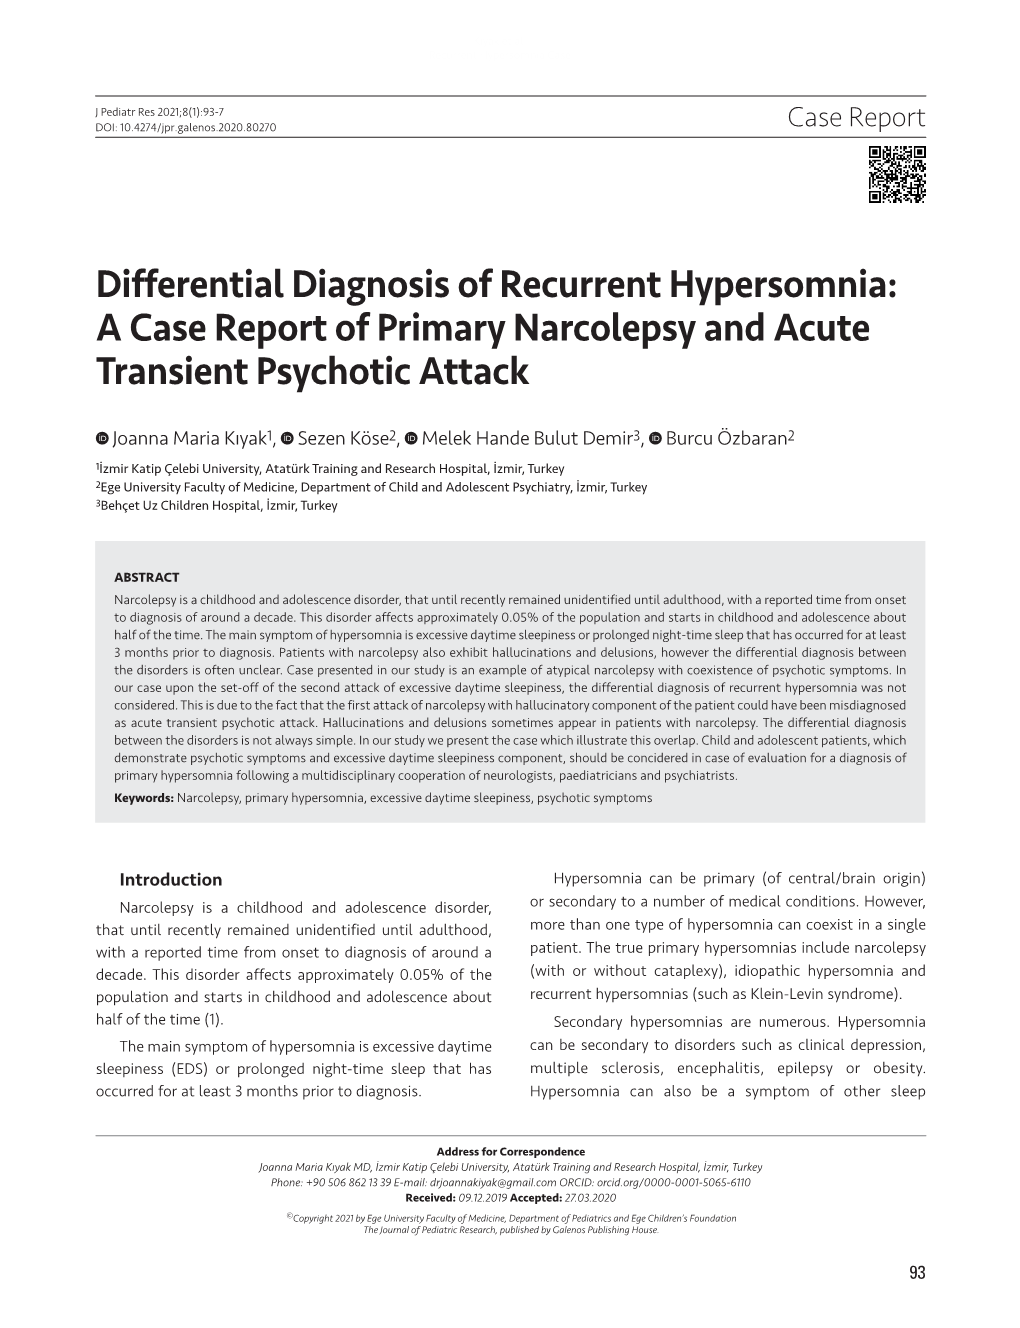 Differential Diagnosis of Recurrent Hypersomnia: a Case Report of Primary Narcolepsy and Acute Transient Psychotic Attack